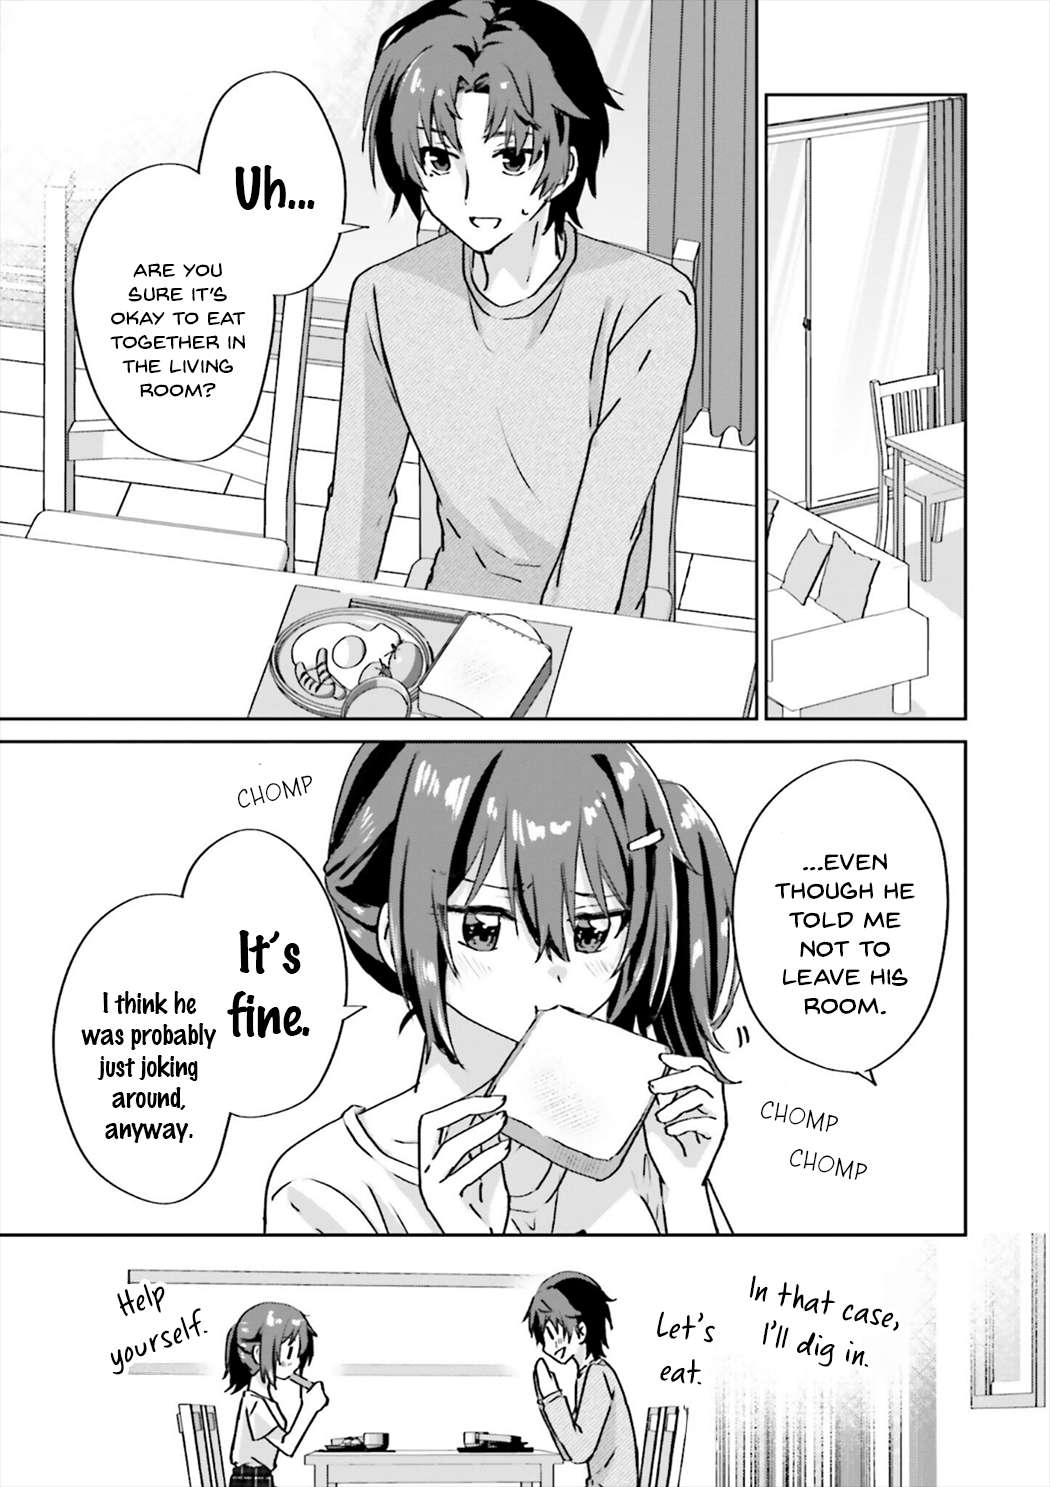 Since I’ve Entered the World of Romantic Comedy Manga, I’ll Do My Best to Make the Losing Heroine Happy. - chapter 6.5 - #5